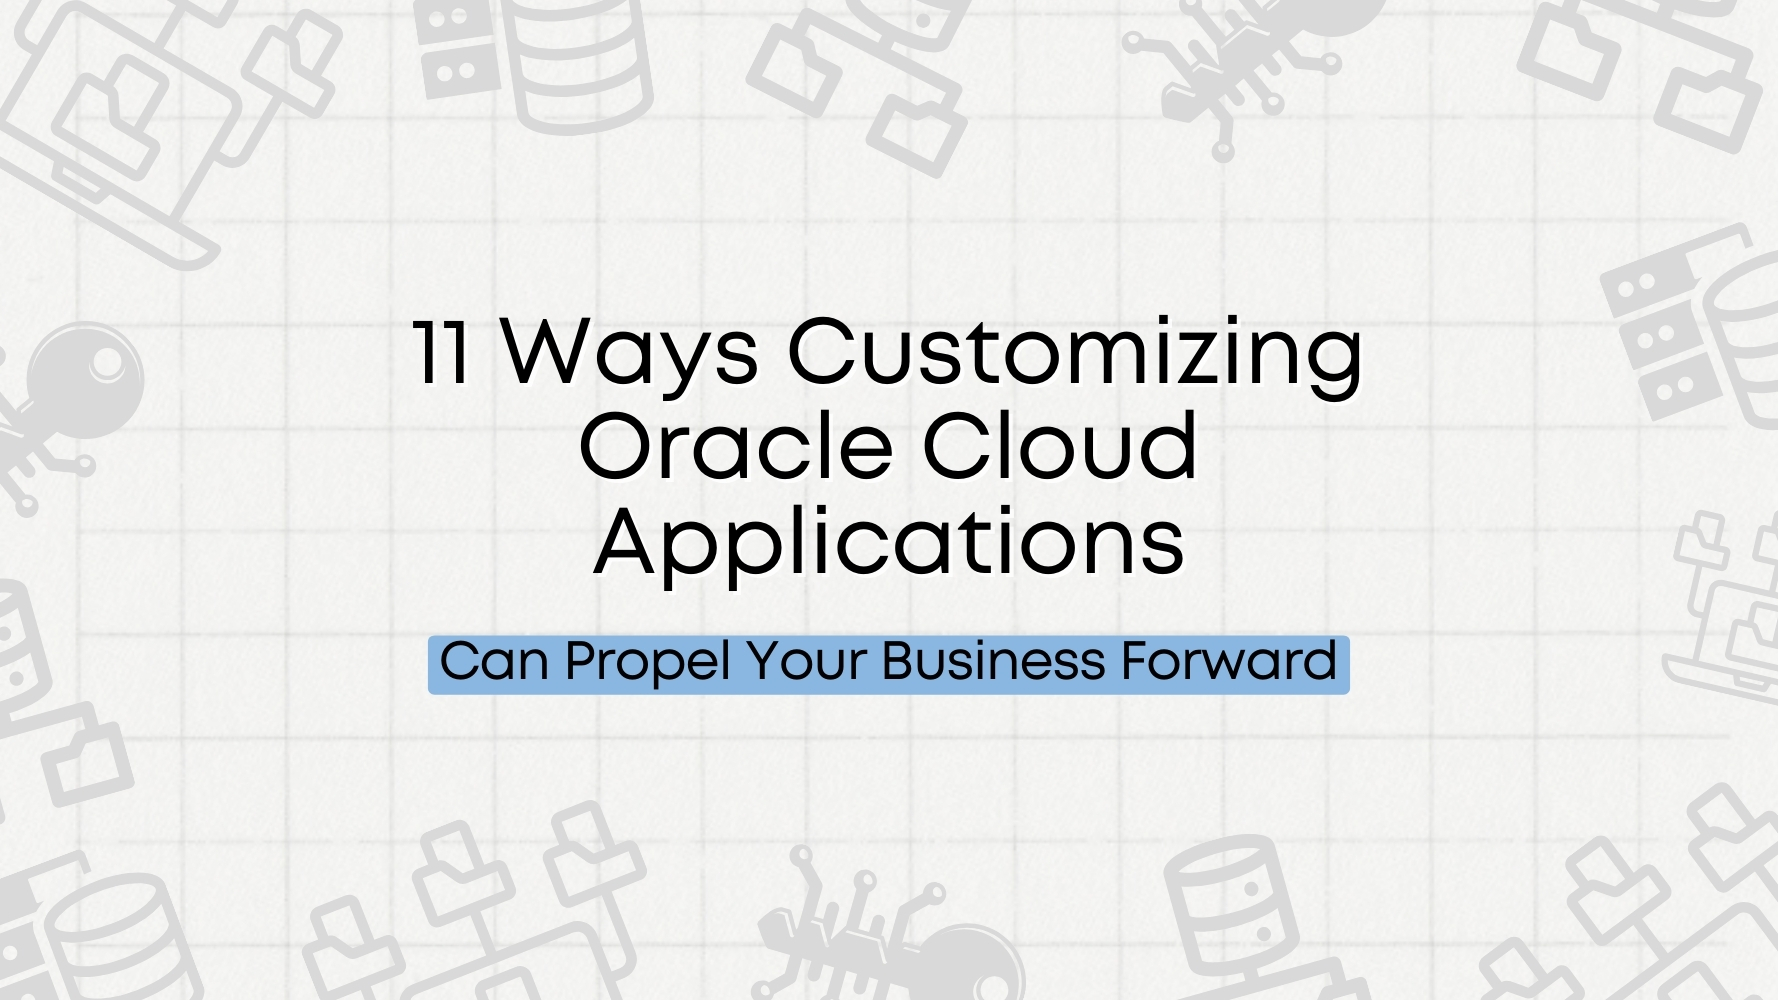 11-Ways-Customizing-Oracle-Cloud-Applications-Can-Propel-Your-Business-Forward.jpg